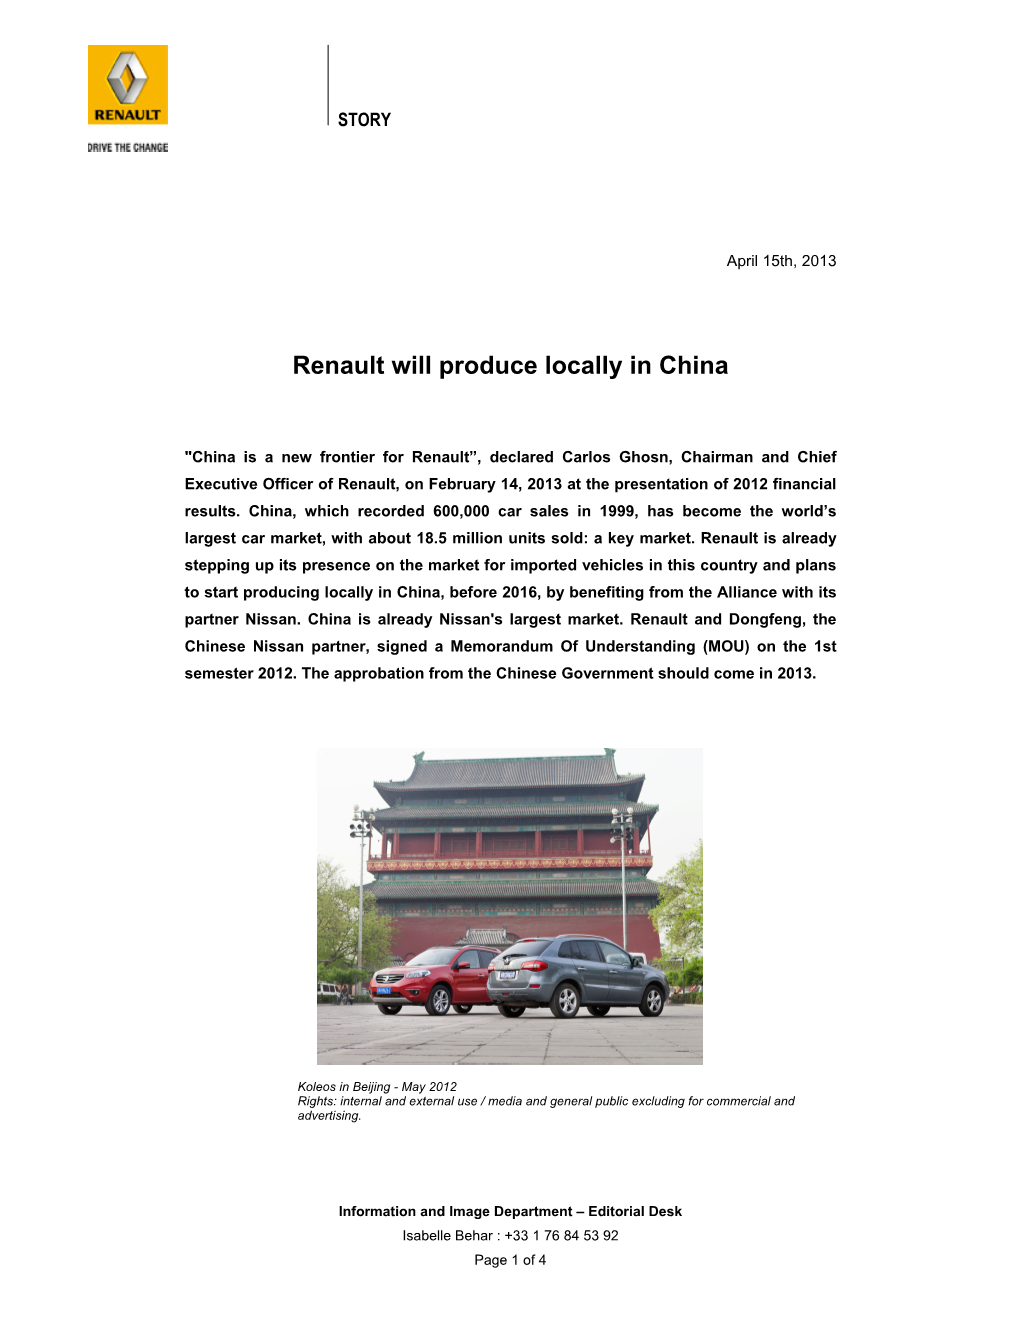 Renault Will Produce Locally in China